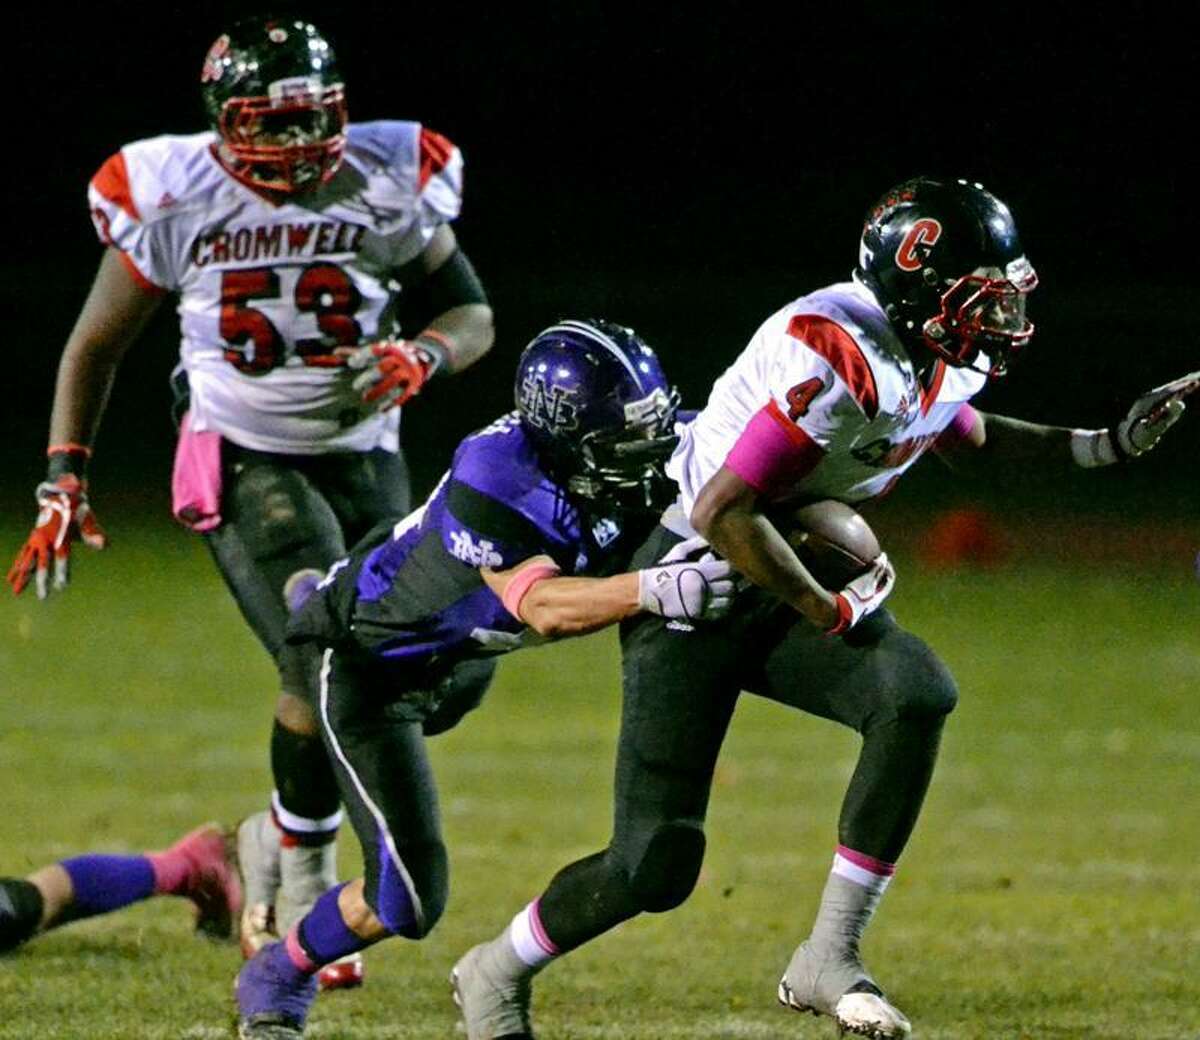 Cromwell running back Derrick Villard runs for a long gain after breaking a tackle from North Branford linebacker Gary Falanga. Photo by Sean Meenaghan/New Haven Register.